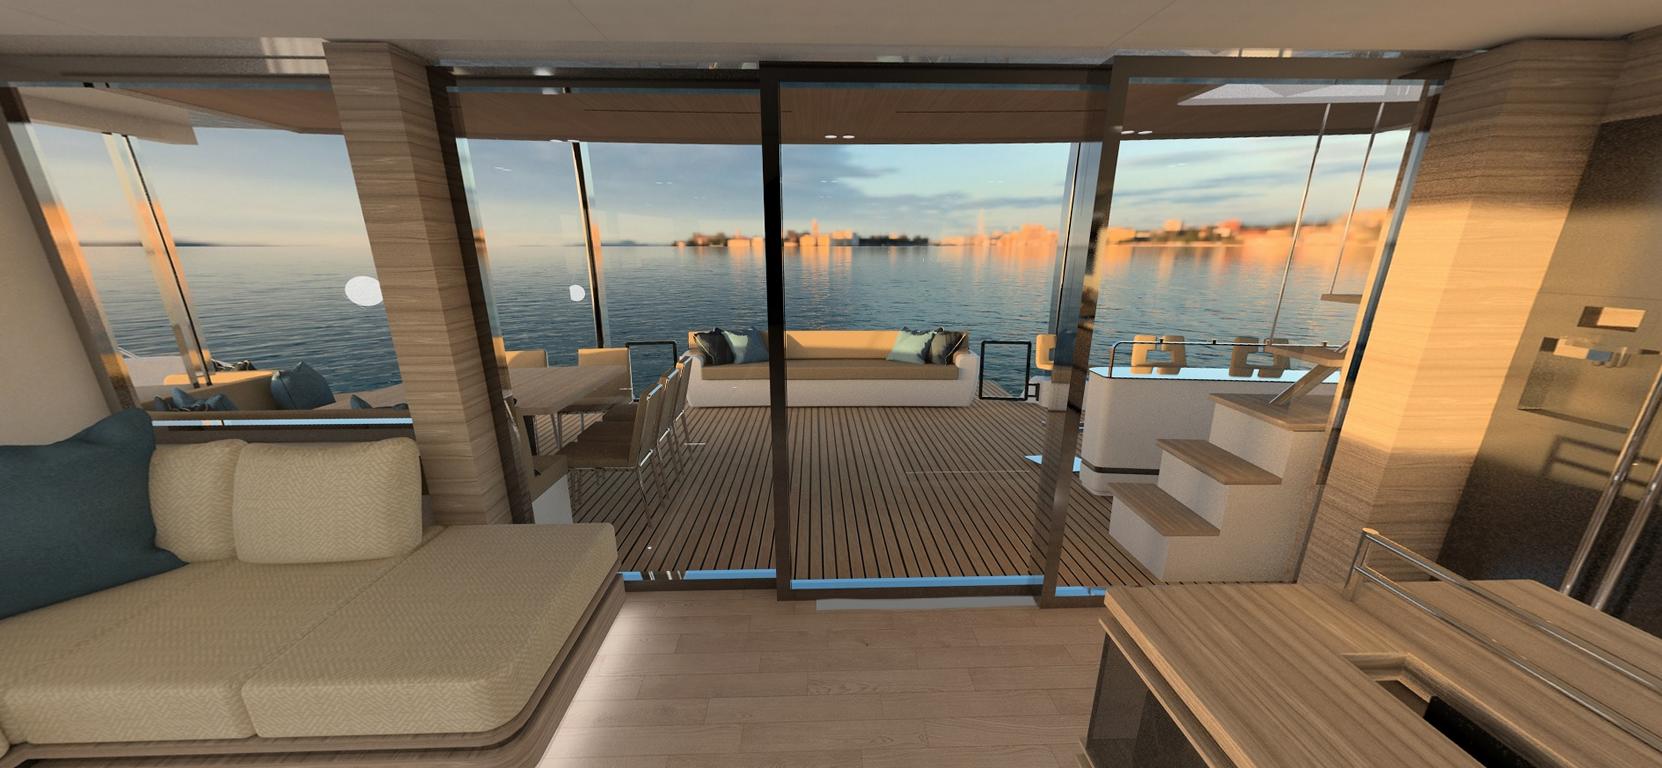 The future of luxury yachting